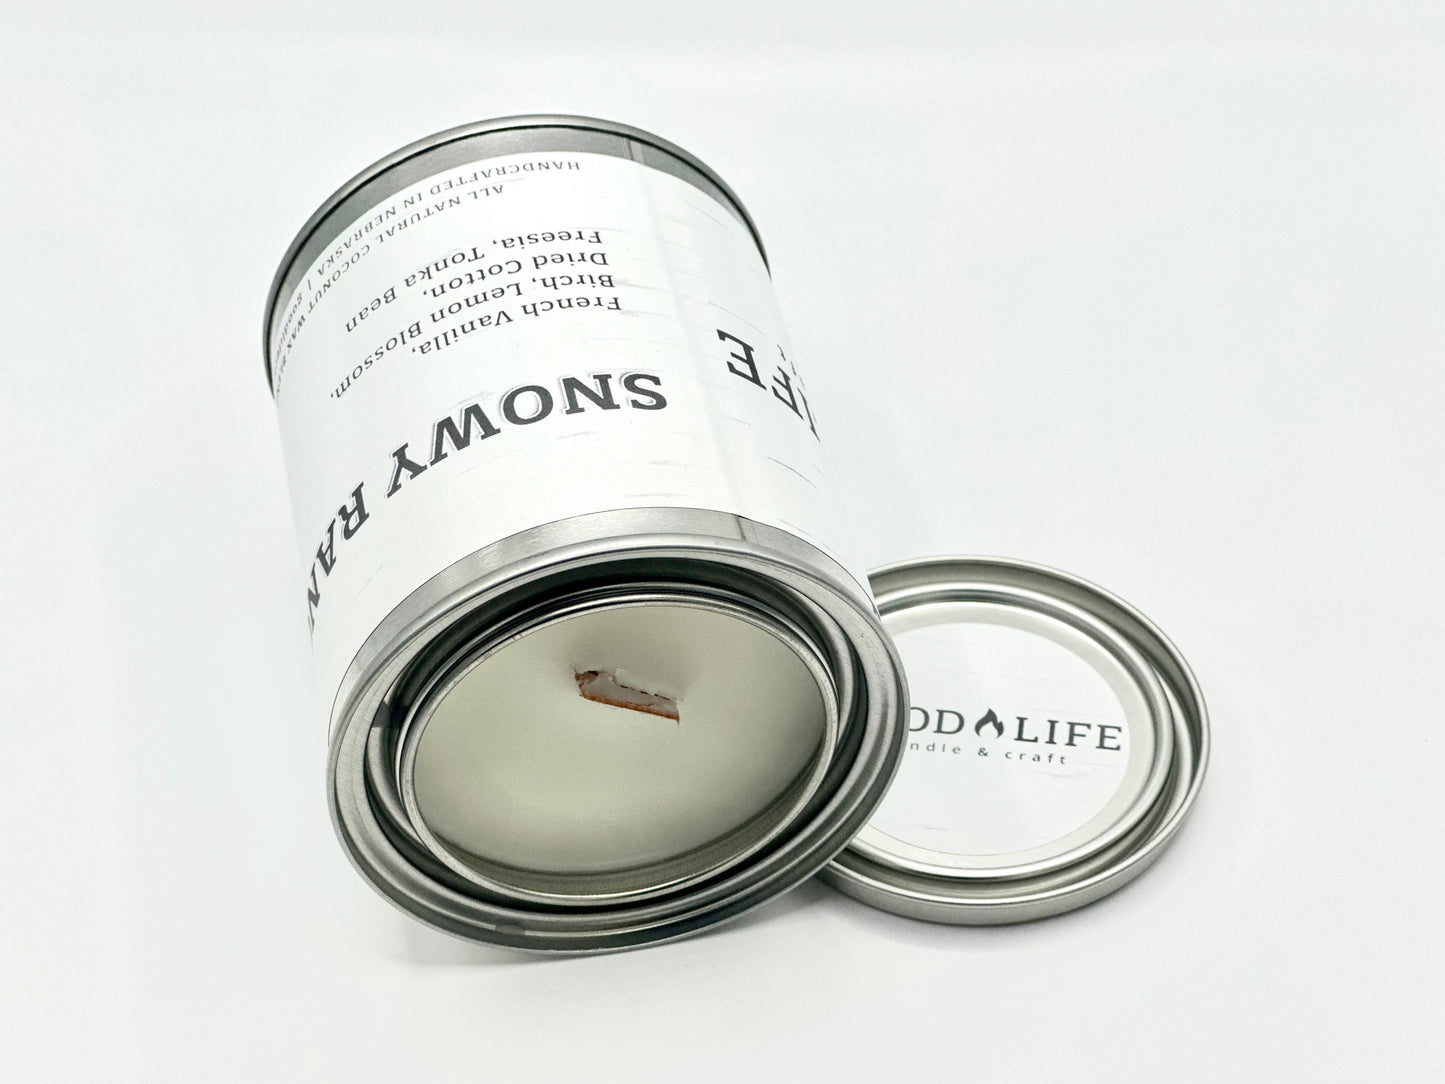 Snowy Range Scented Candle